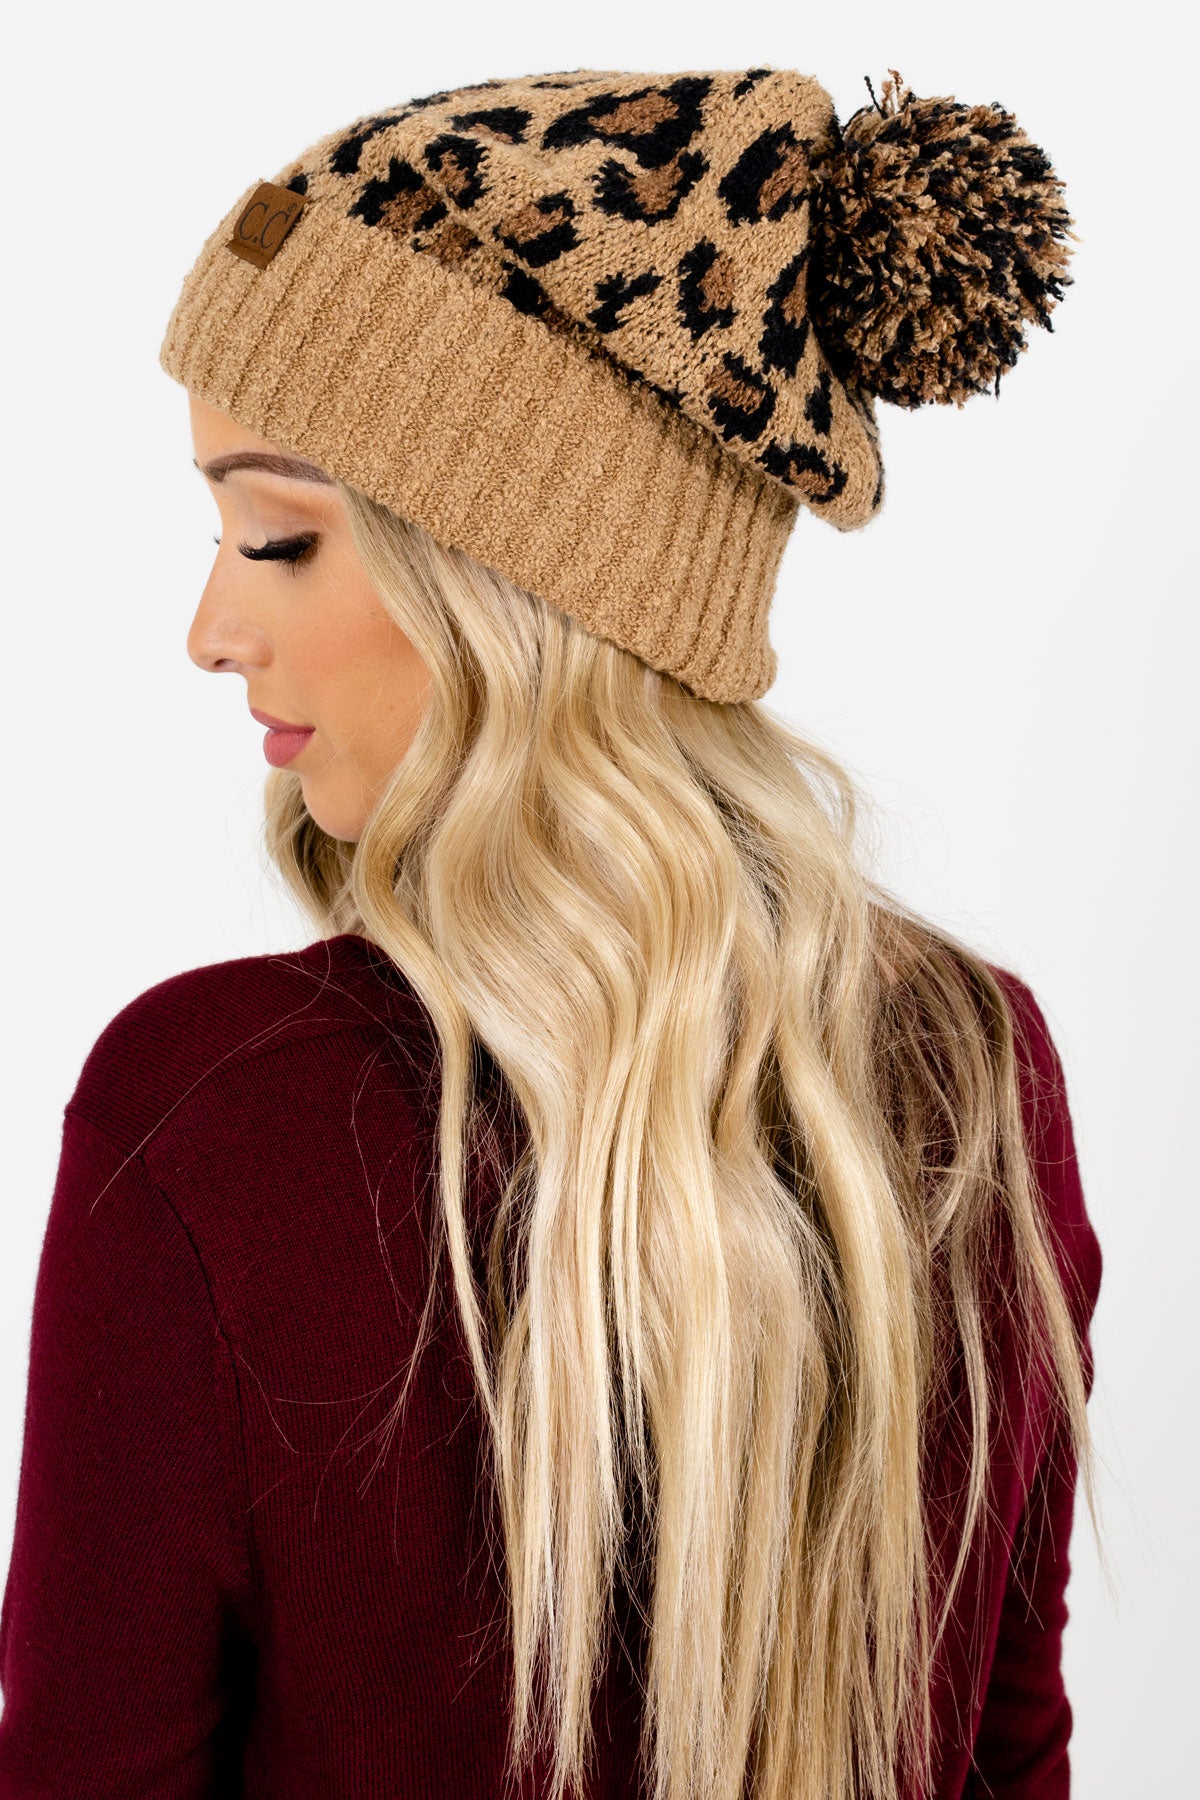 Tan Brown and Black Leopard Print Boutique Beanies for Women